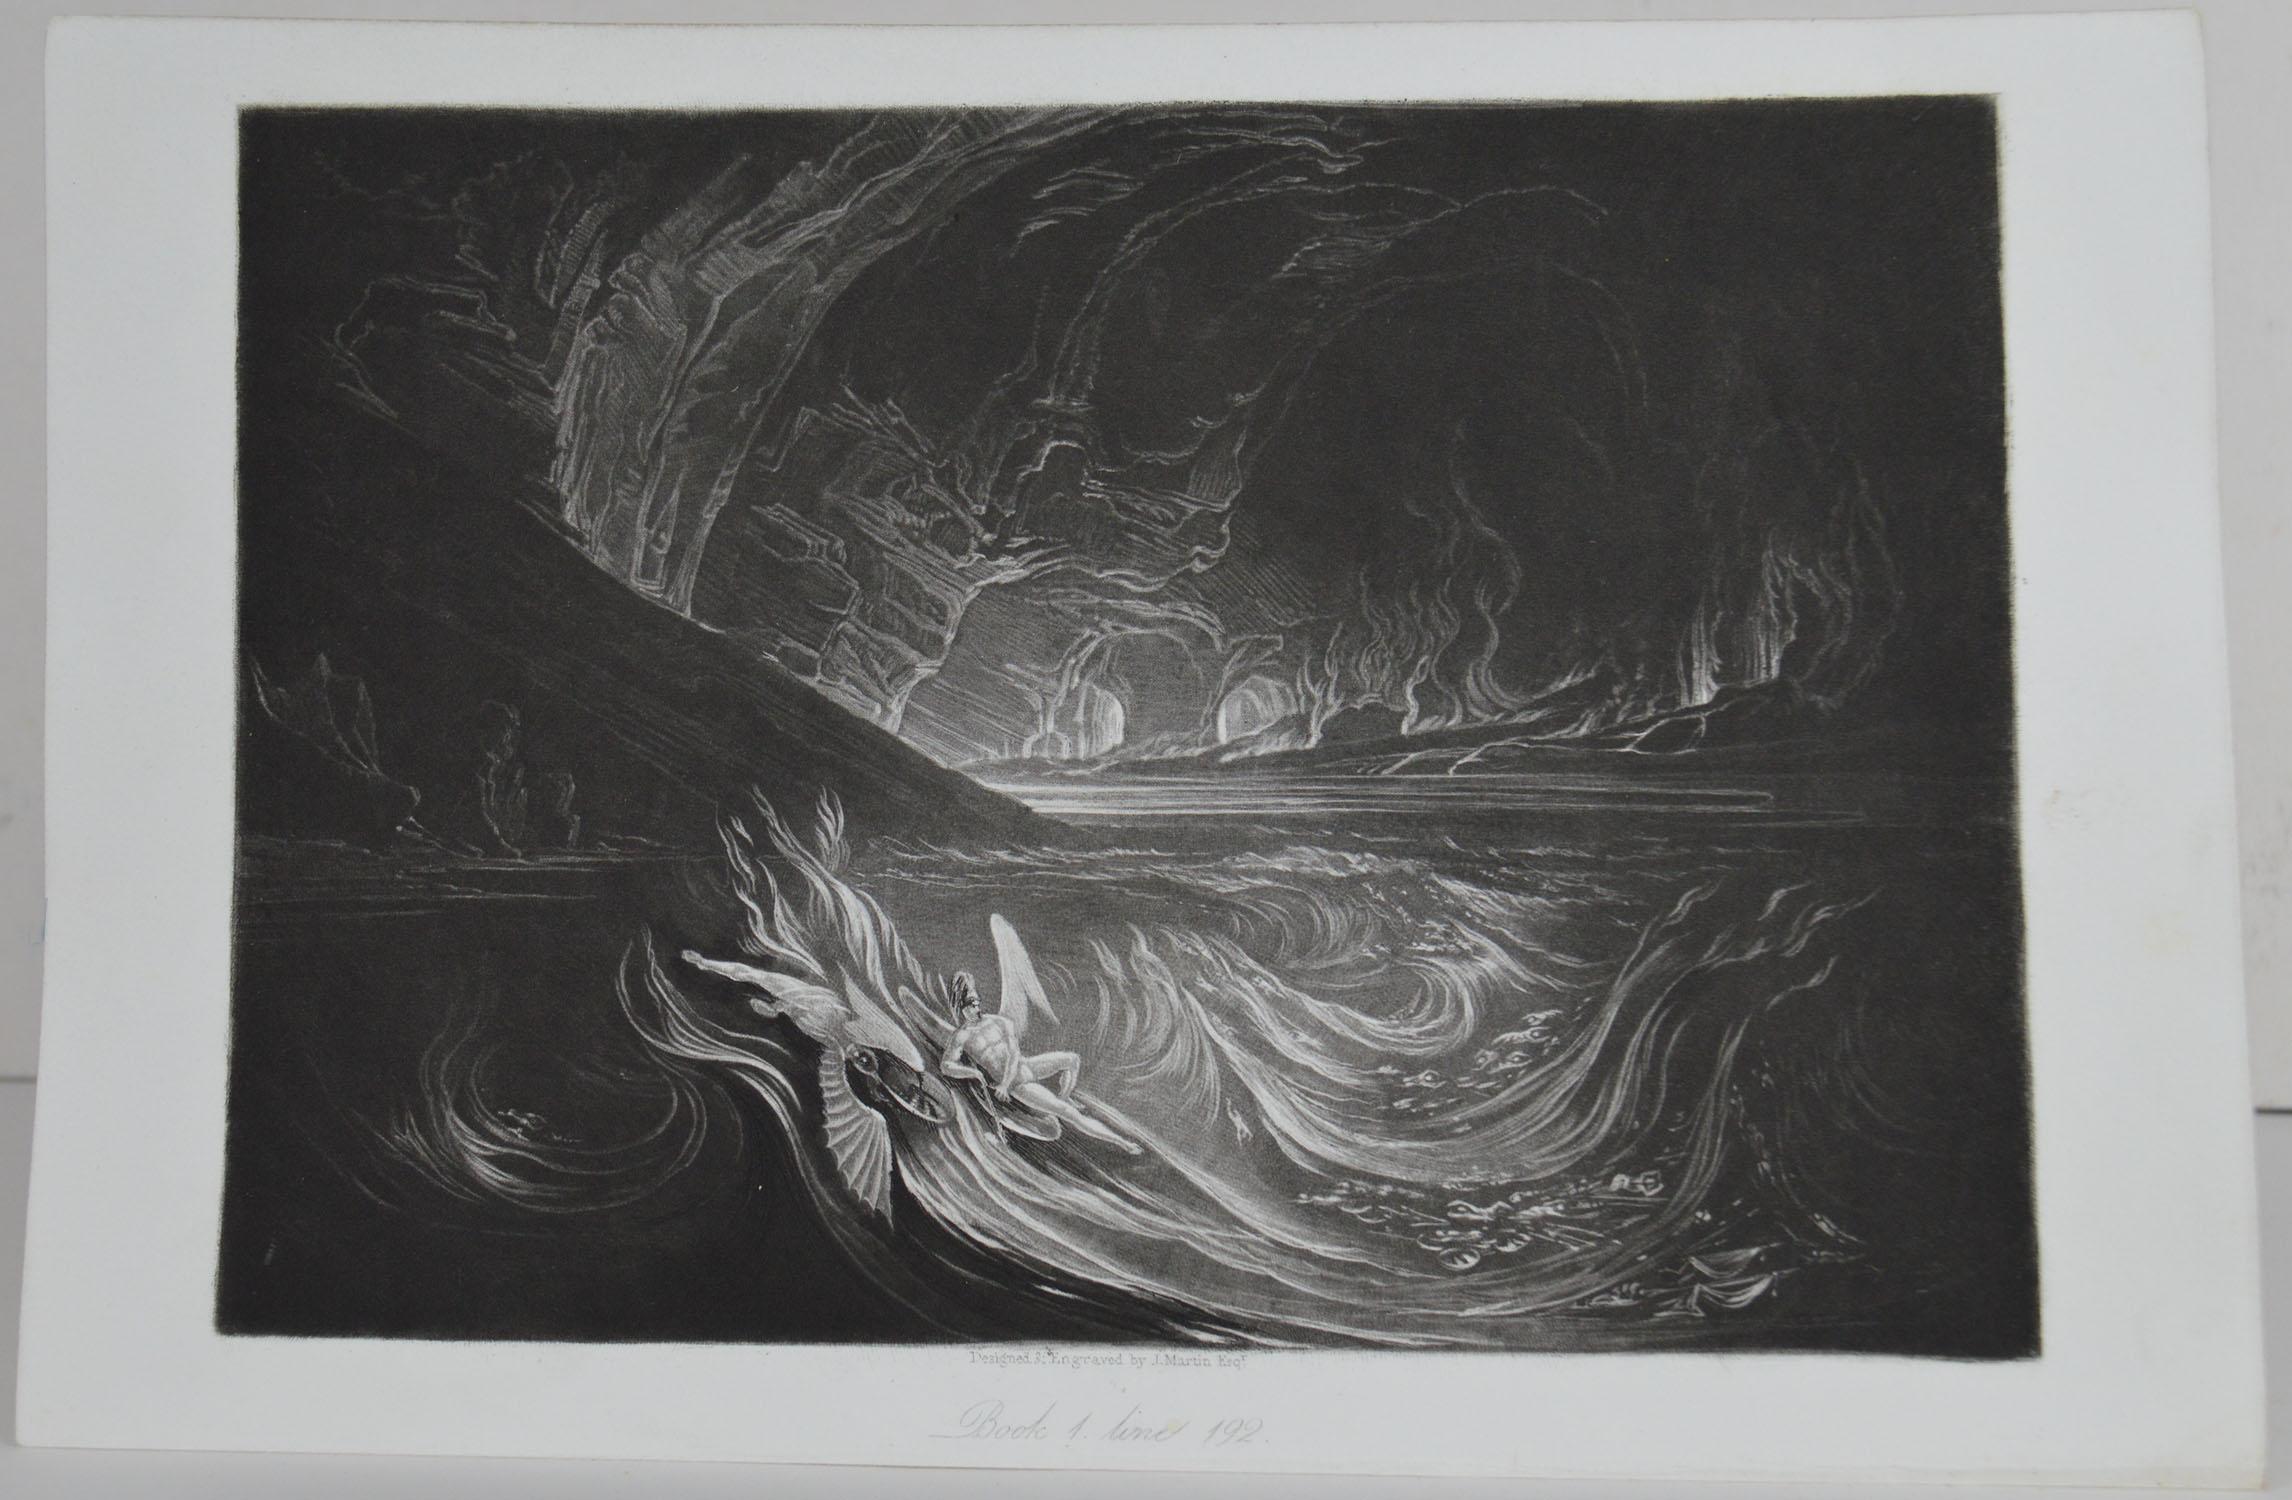 Sensational image by John Martin.

Titled Satan on the Burning Lake

Drawn and engraved by John Martin. From the highly regarded Washbourne Publication of Milton's Paradise Lost, 1853.

Unframed.

 